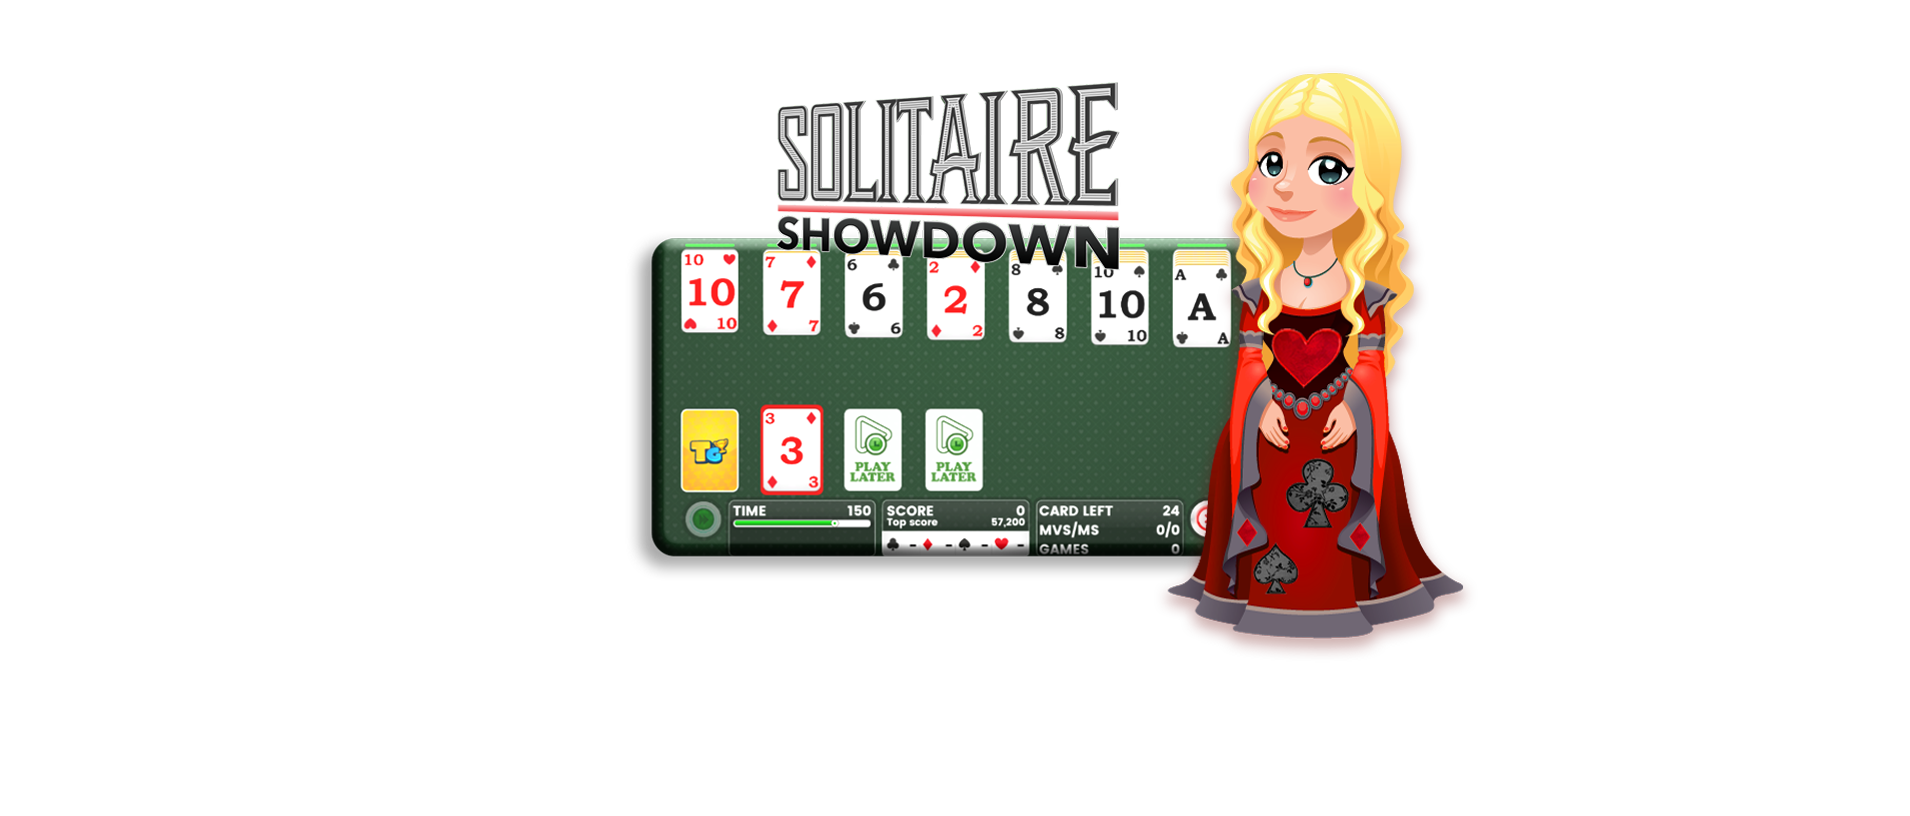 Double Klondike Solitaire - Play Online & 100% Free